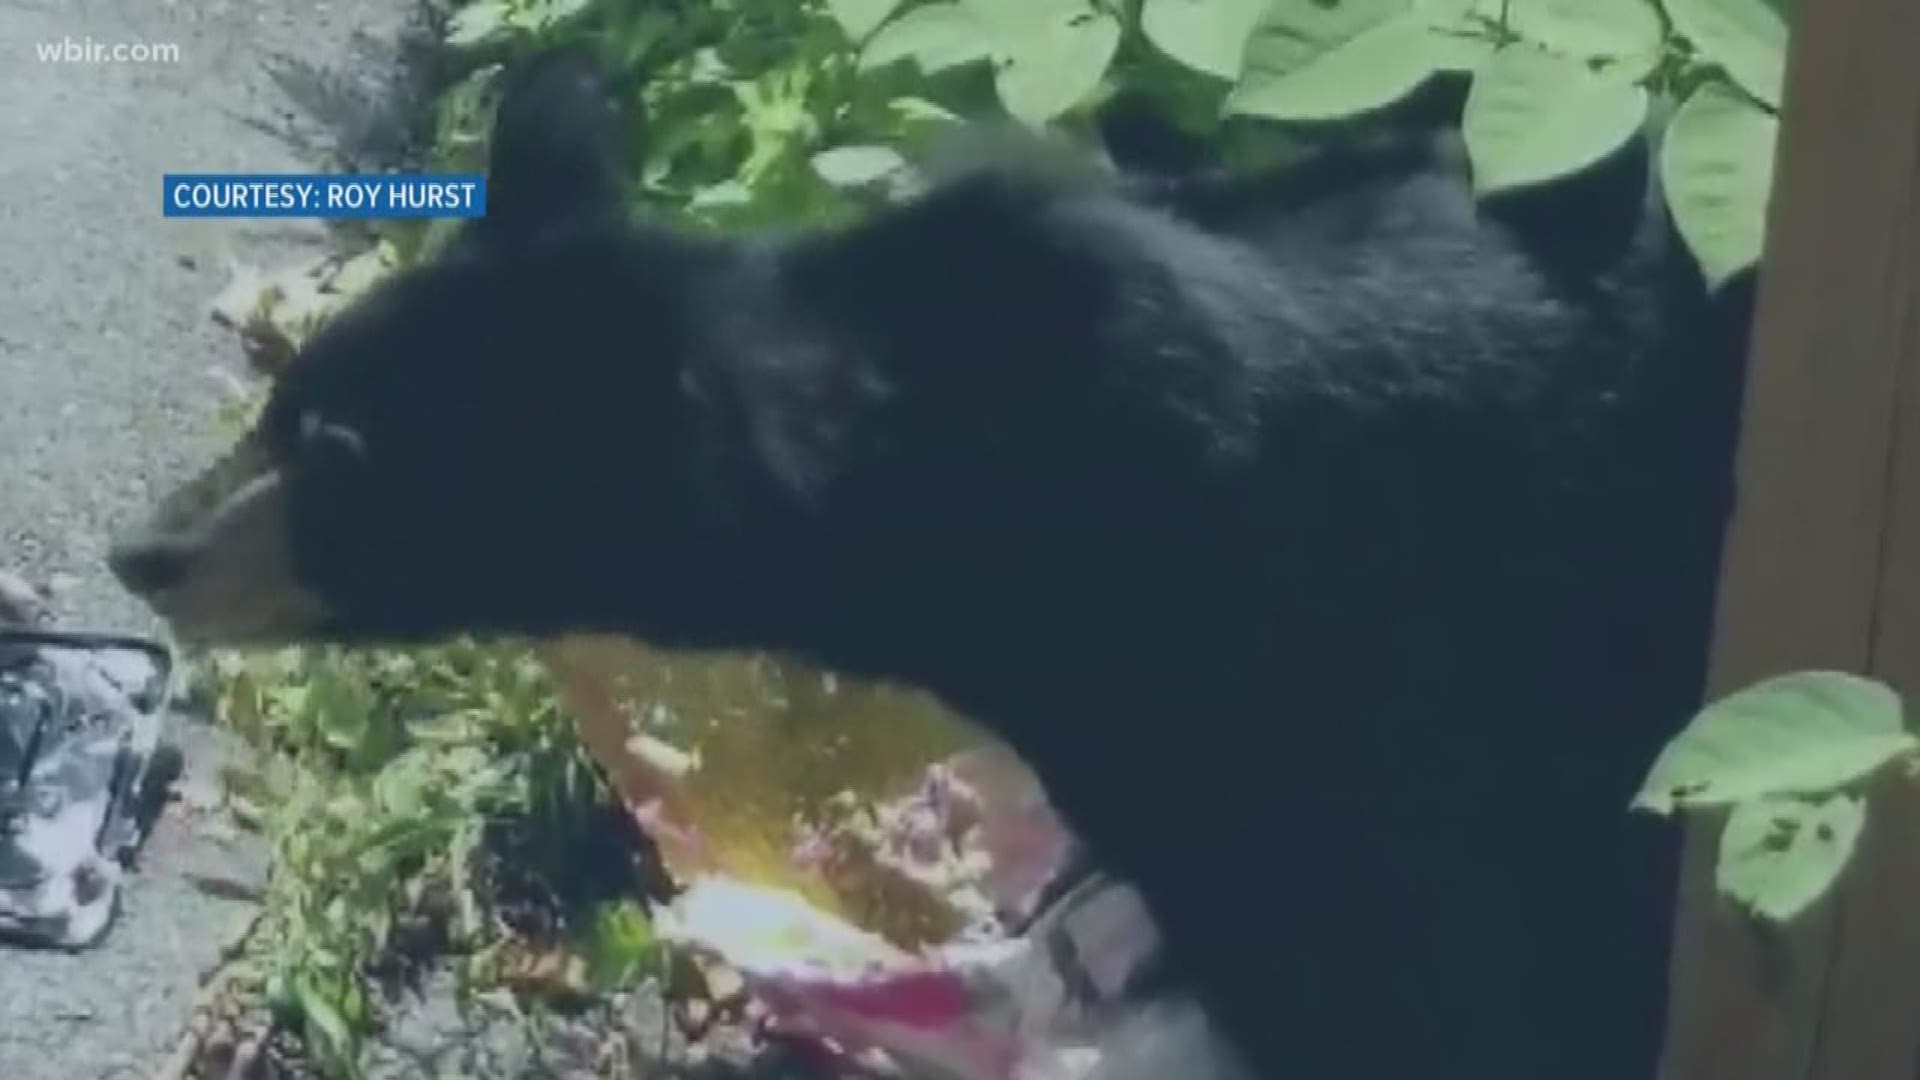 New video shows a bear eating trash in Gatlinburg. The TWRA says to prevent this problem, keep your trash in bear-proof containers, don't leave pet food outside and remove bird feeders.